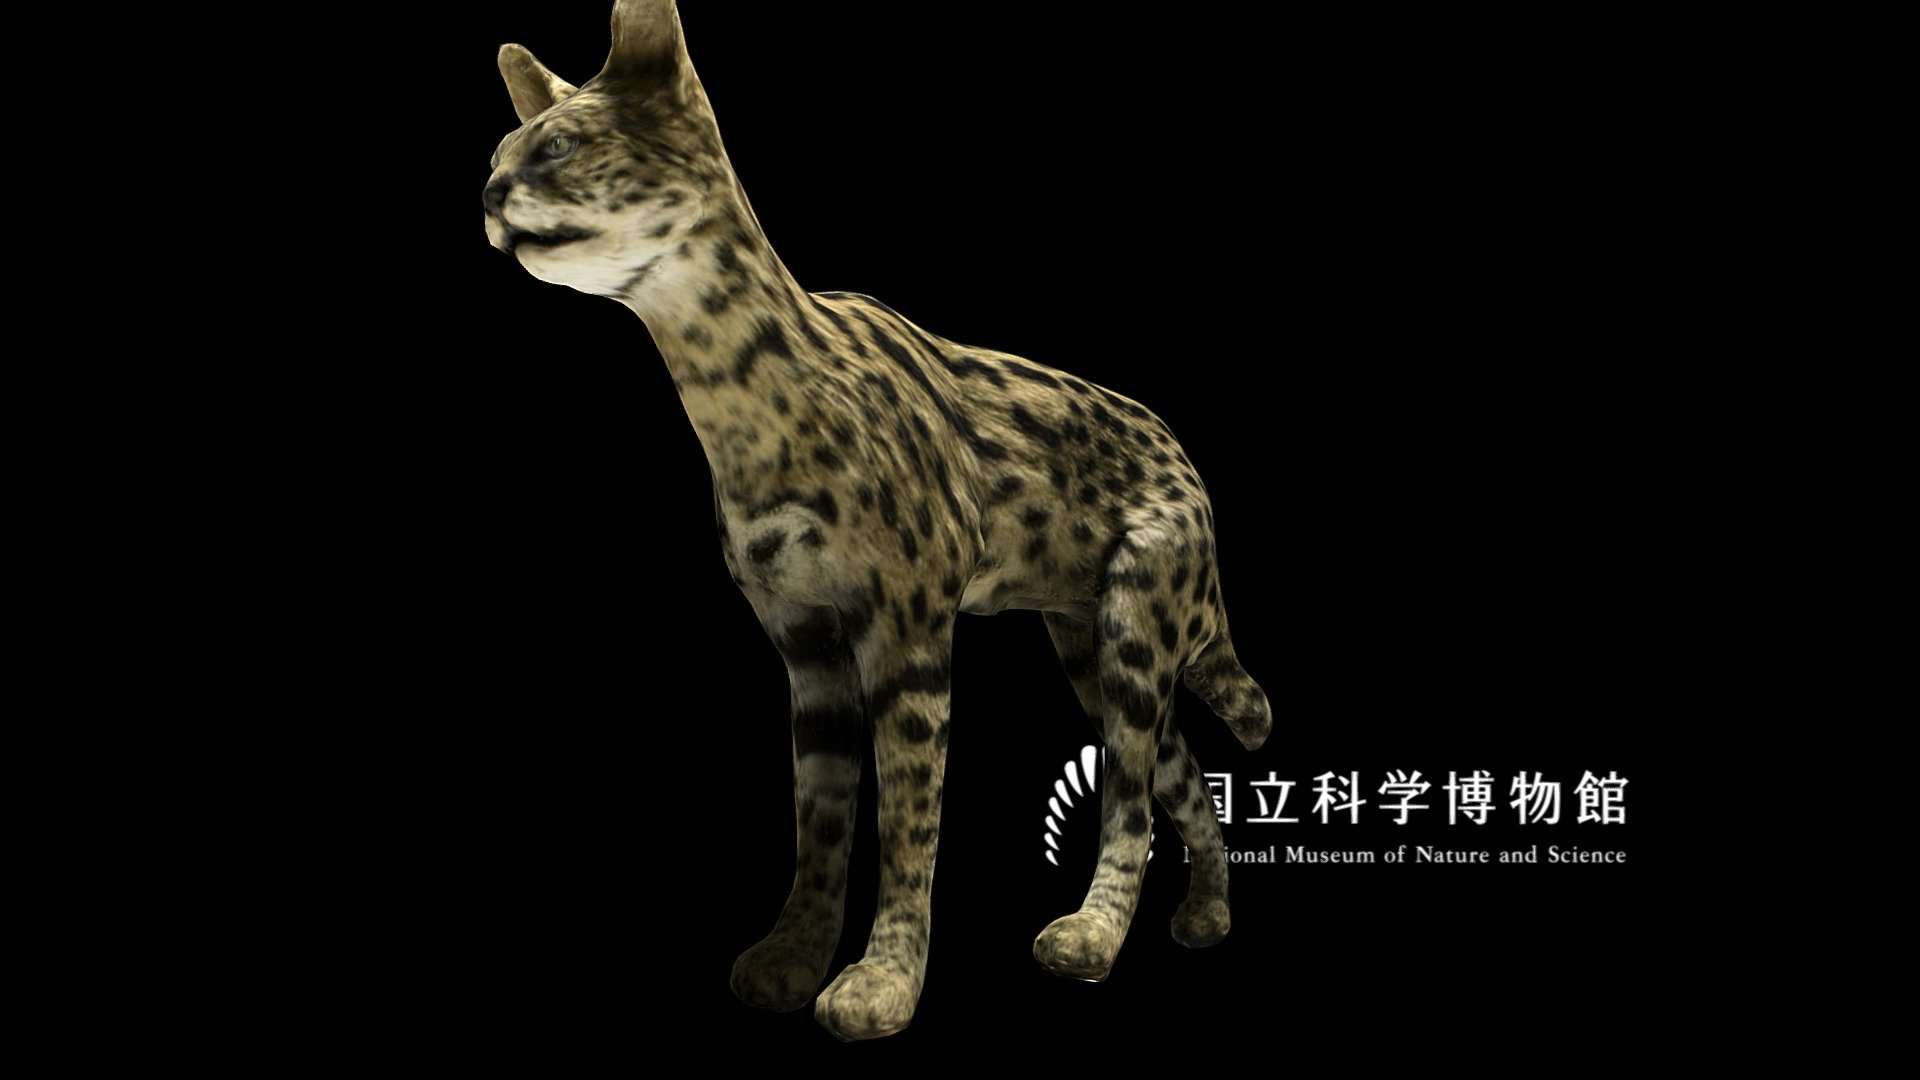 ■ About specimen



Scientific name : Leptailurus serval

Japanese vernacular name : サーバル

English vernacular name : Serval

Specimen type : Taxidermy specimen

Collection date : 1988-10

Collection place : Dire Dawa, ETHIOPIA

See also : record page on the &ldquo;Yoshimoto 3D